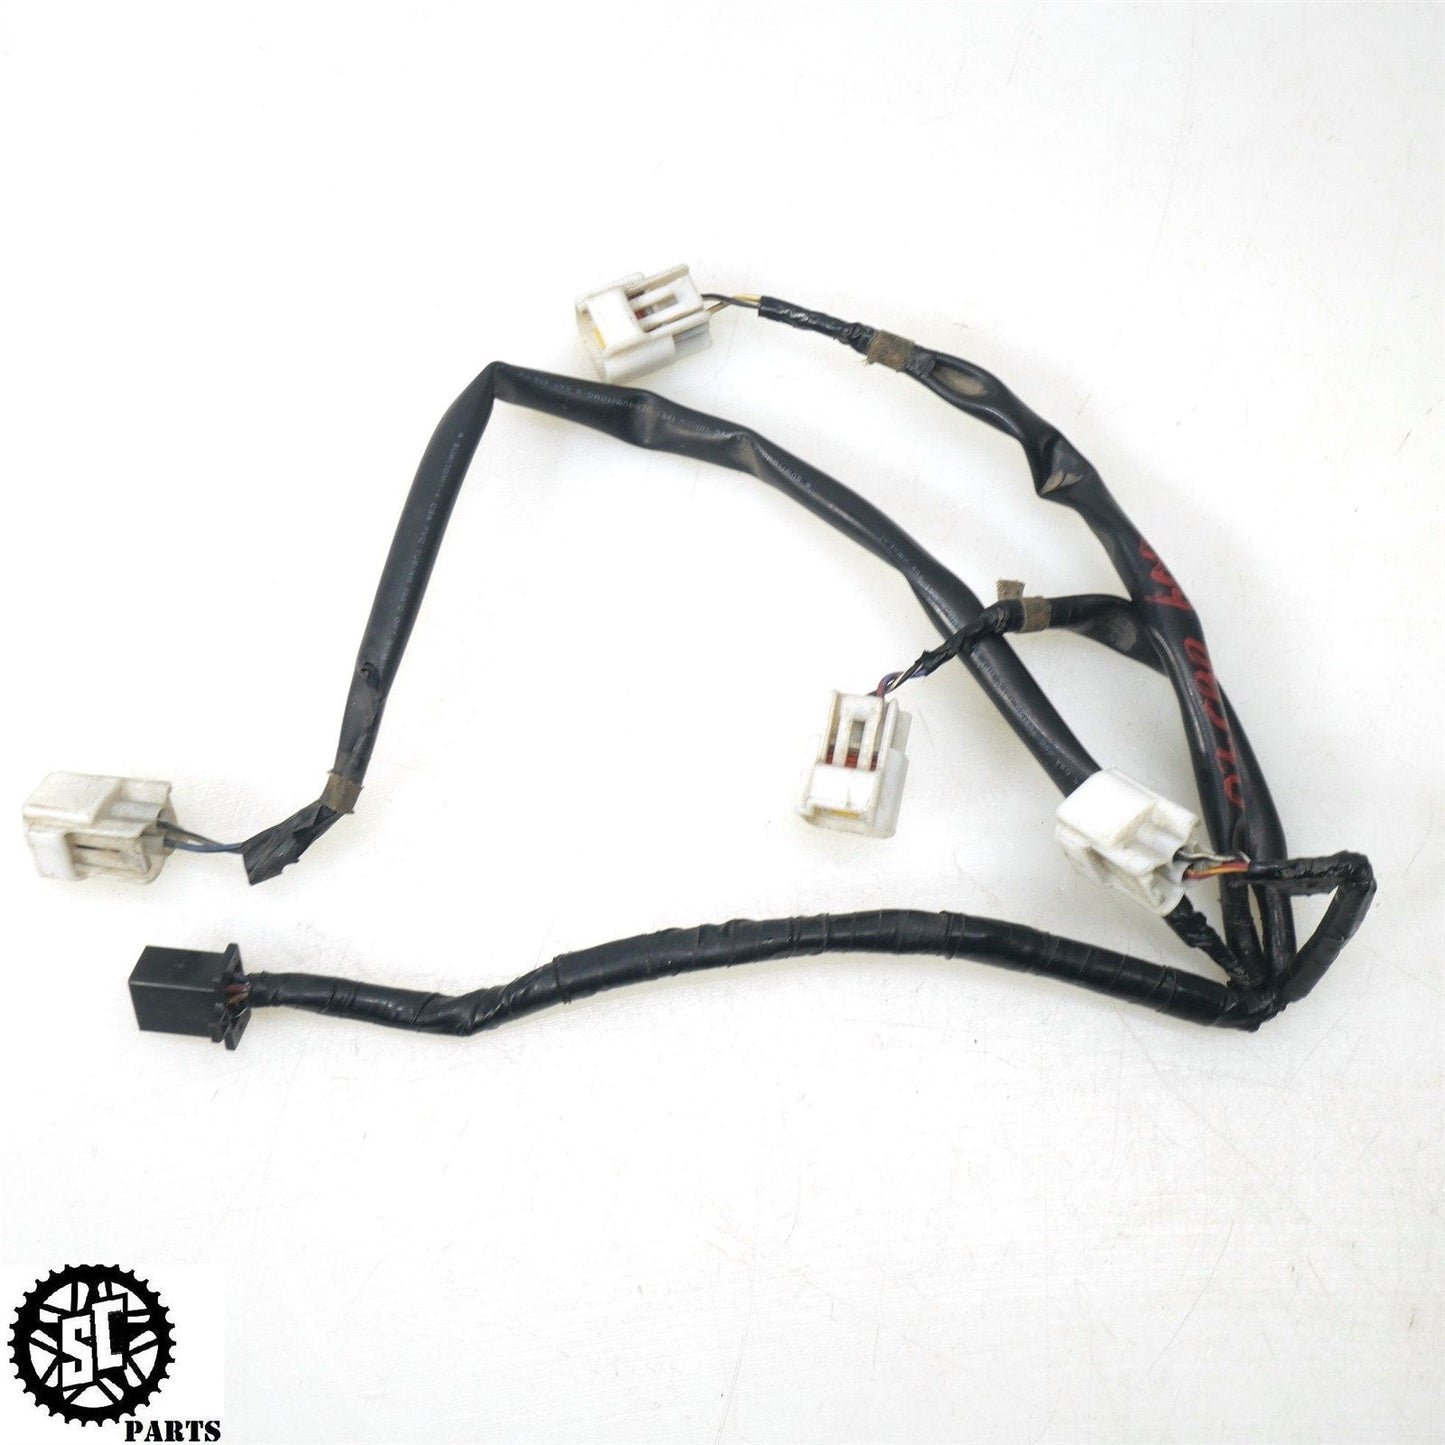 2003-2004 HONDA CBR 600RR IGNITION COIL WIRING HARNESS H11